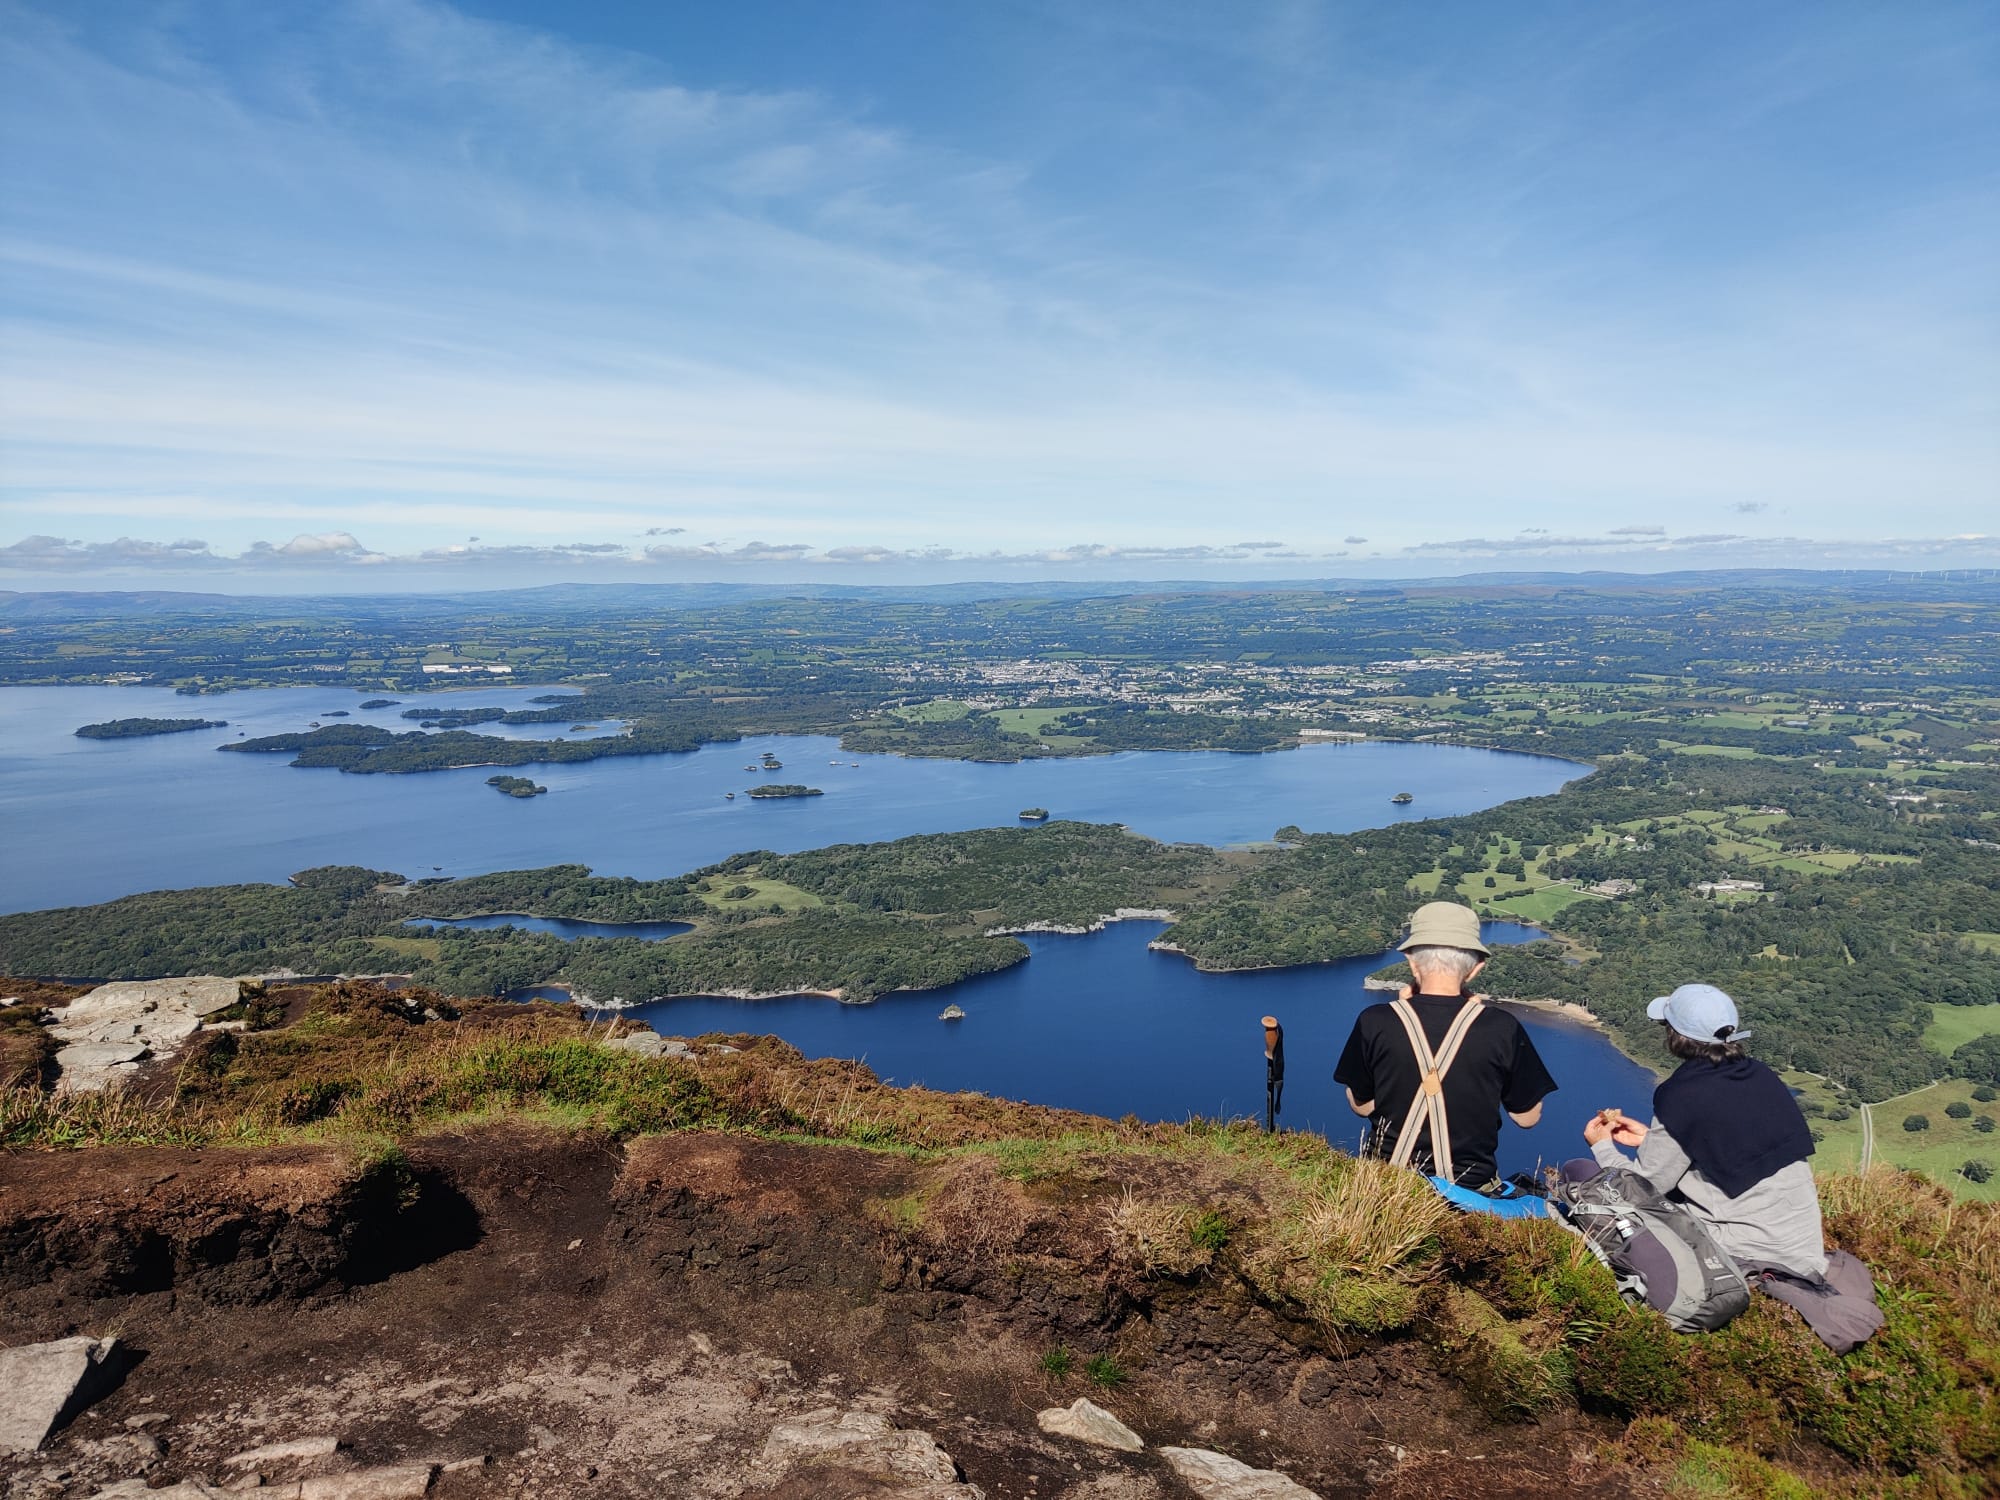 Admiring the amazing views from Torc Mountain Summit